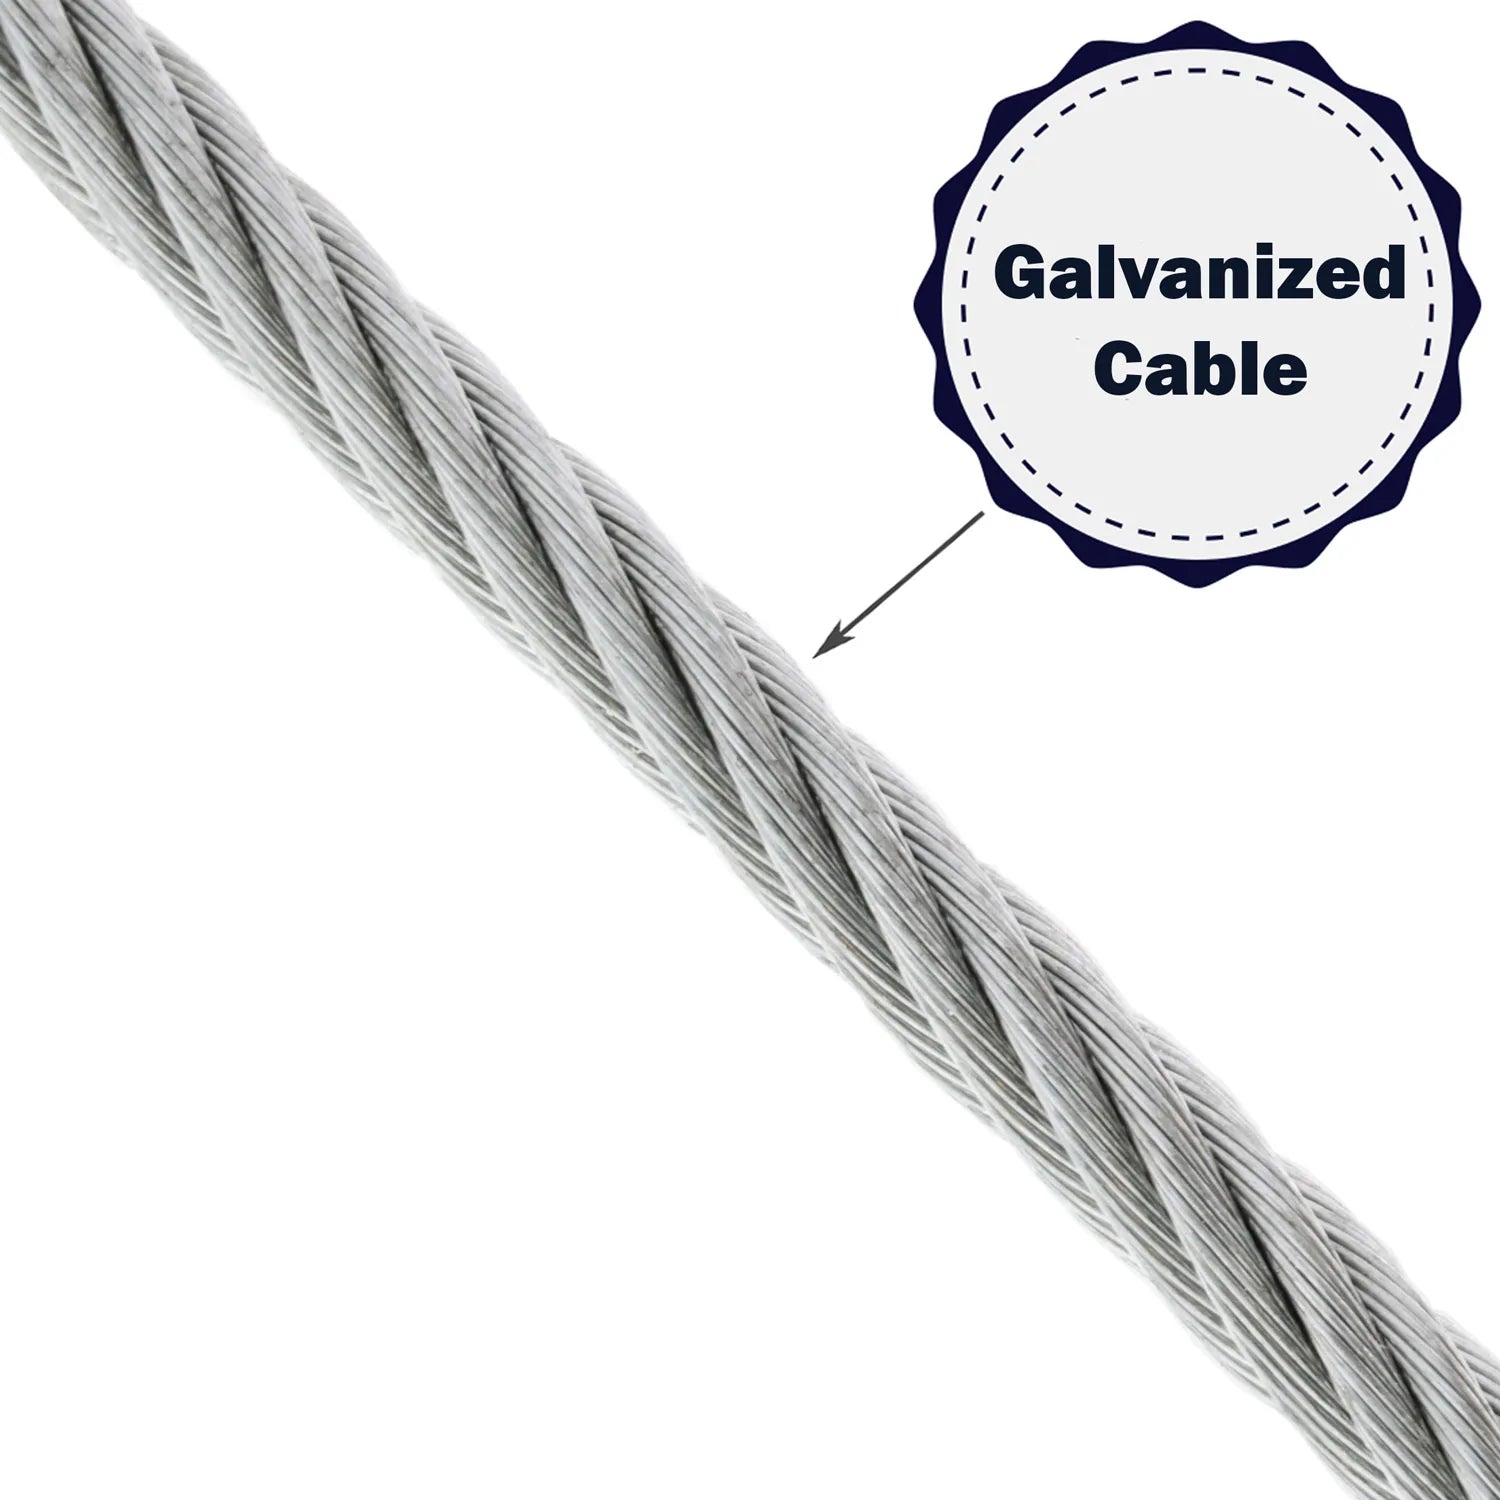 2pc 1/8" Galvanized Wire Cable Sling 7x19-4ft Long With Loop Eyes & Carabiner 